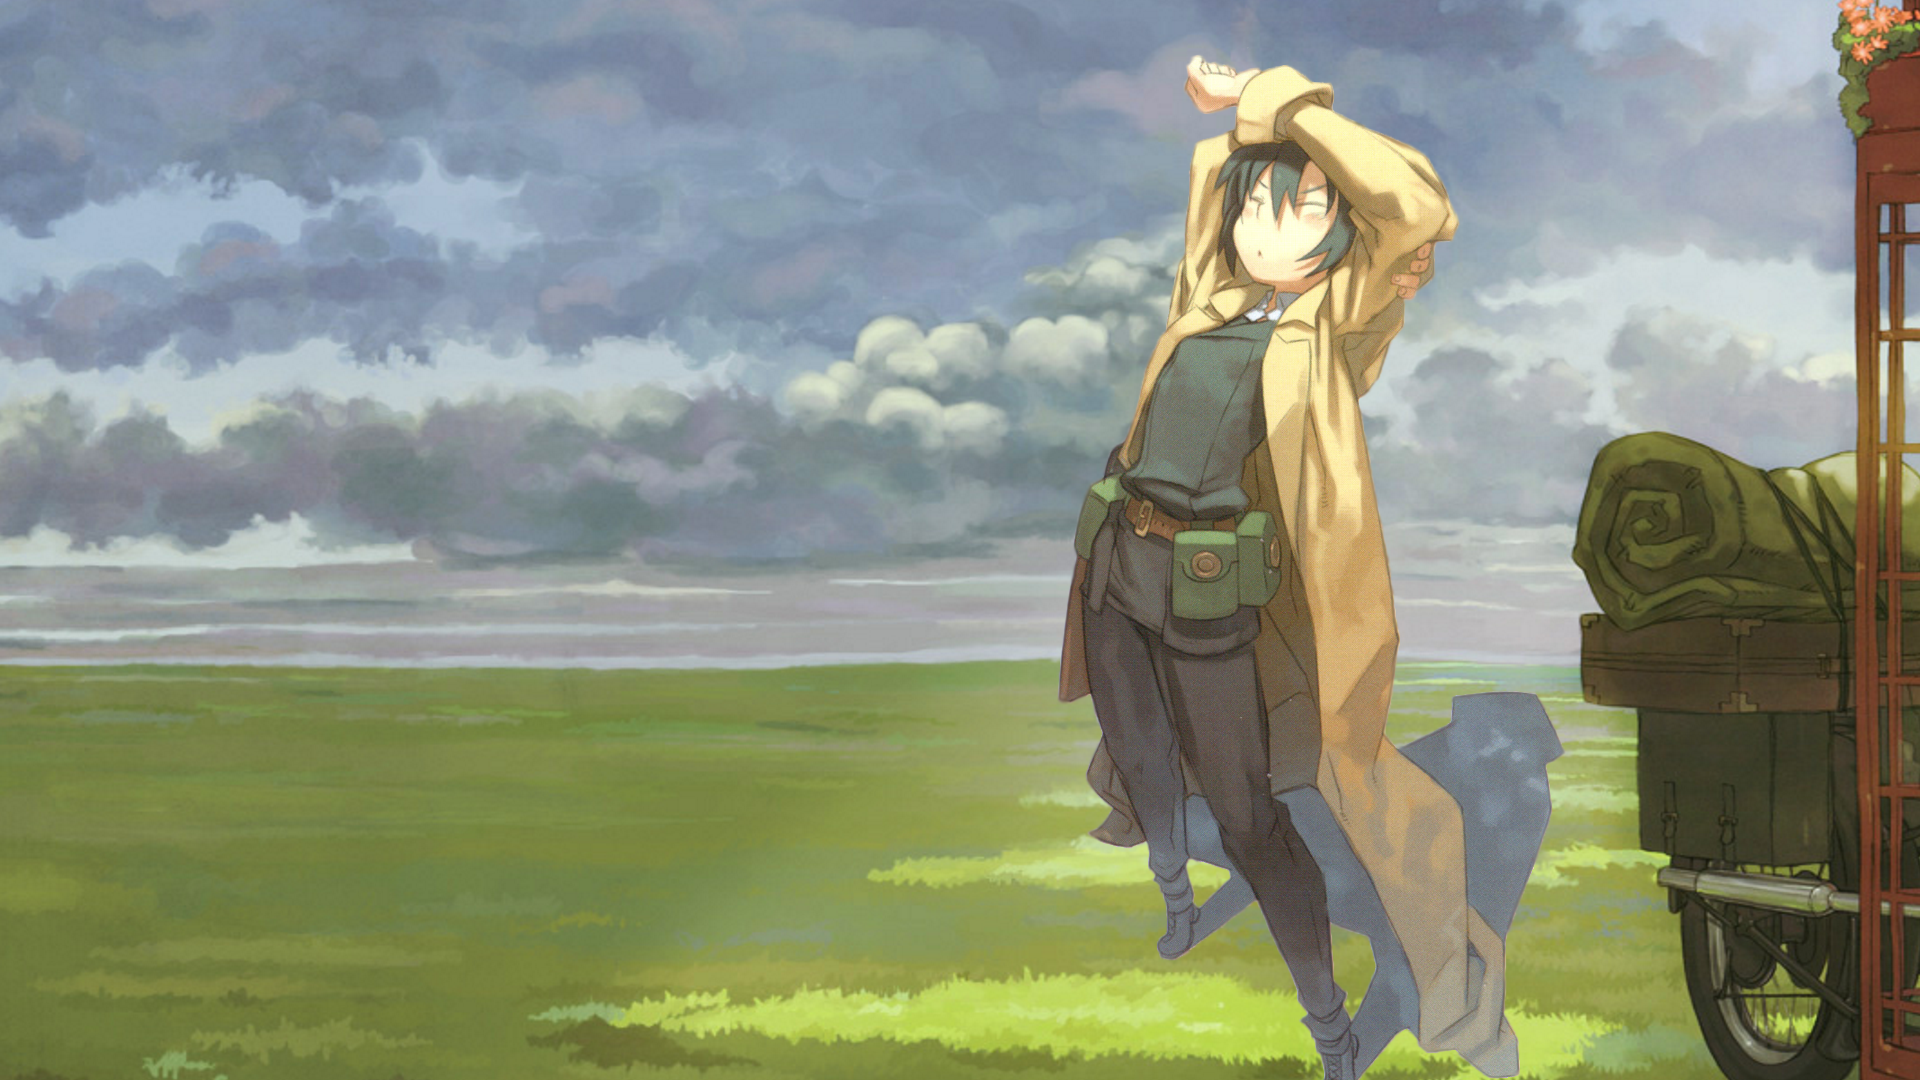 Anime Kino's Journey HD Wallpaper by イリス